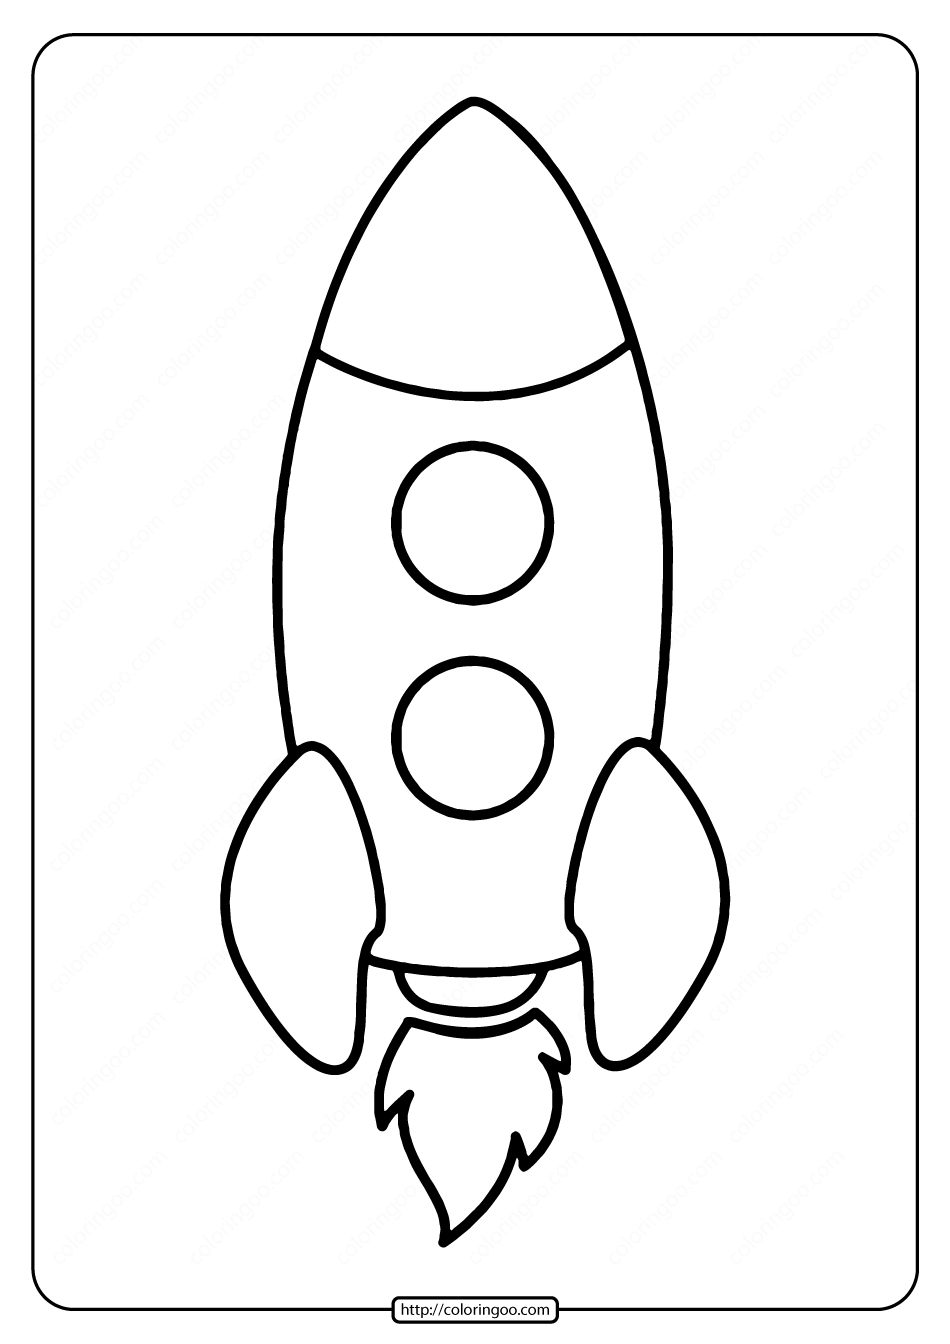 easy rocket coloring pages for kids